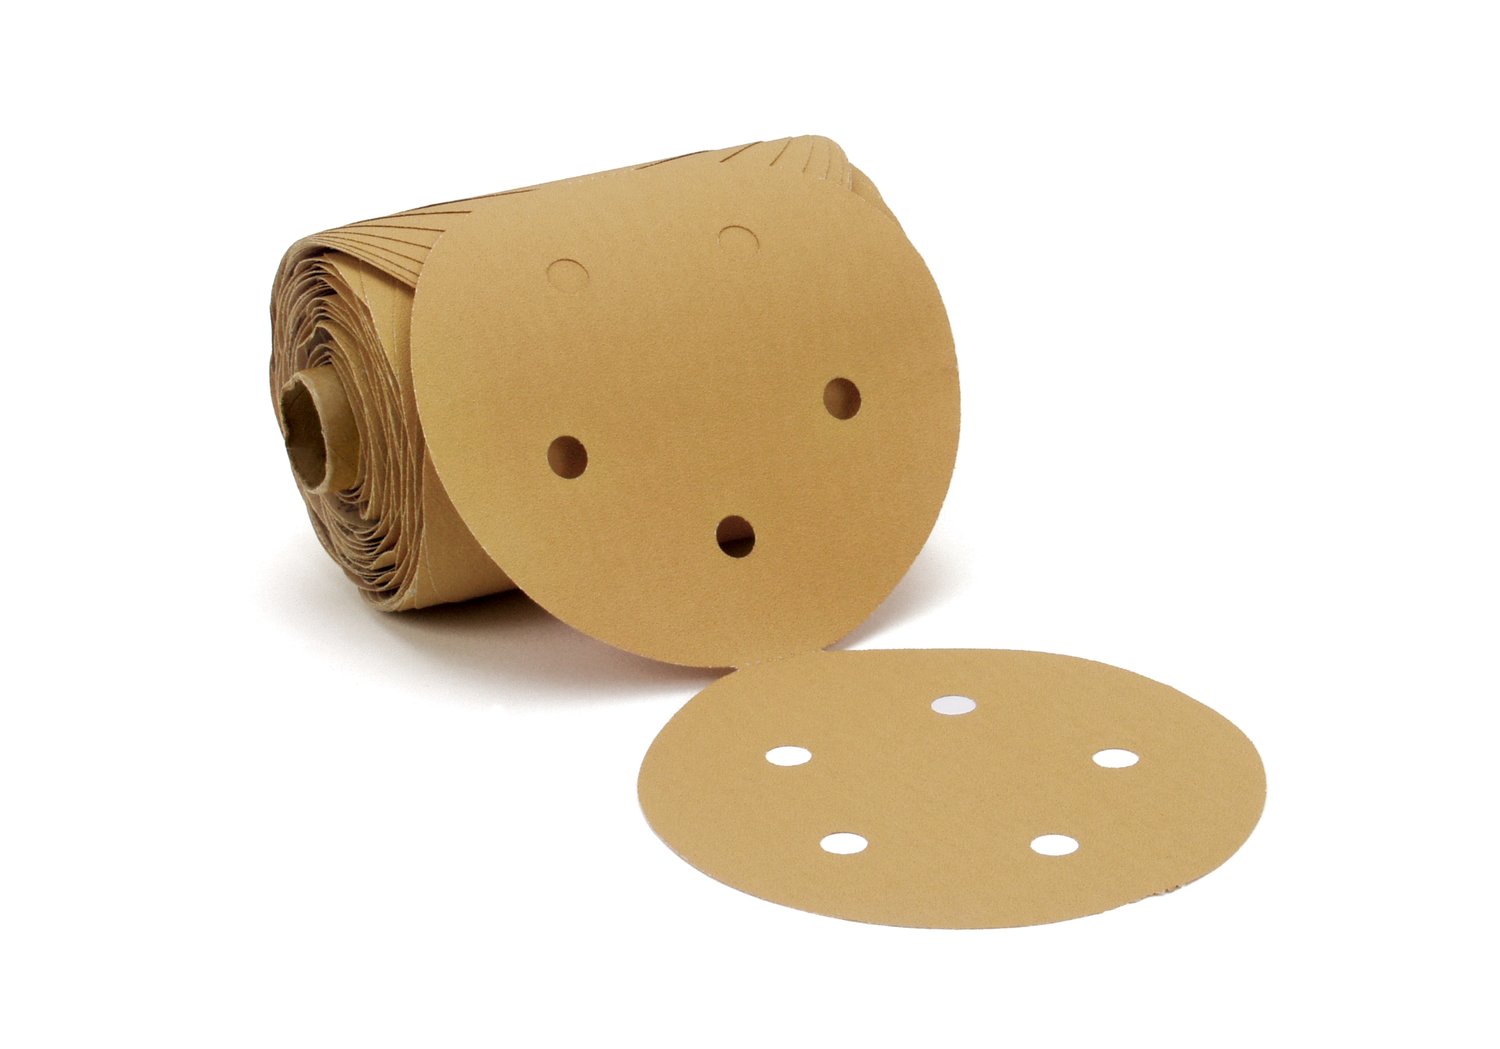 7100054573 - 3M Stikit Gold Paper Disc Roll 216U, 5 in x NH 5 Holes P400 A-weight,
D/F, Die 500FH, 175 Discs/Roll, 6 Rolls/Case